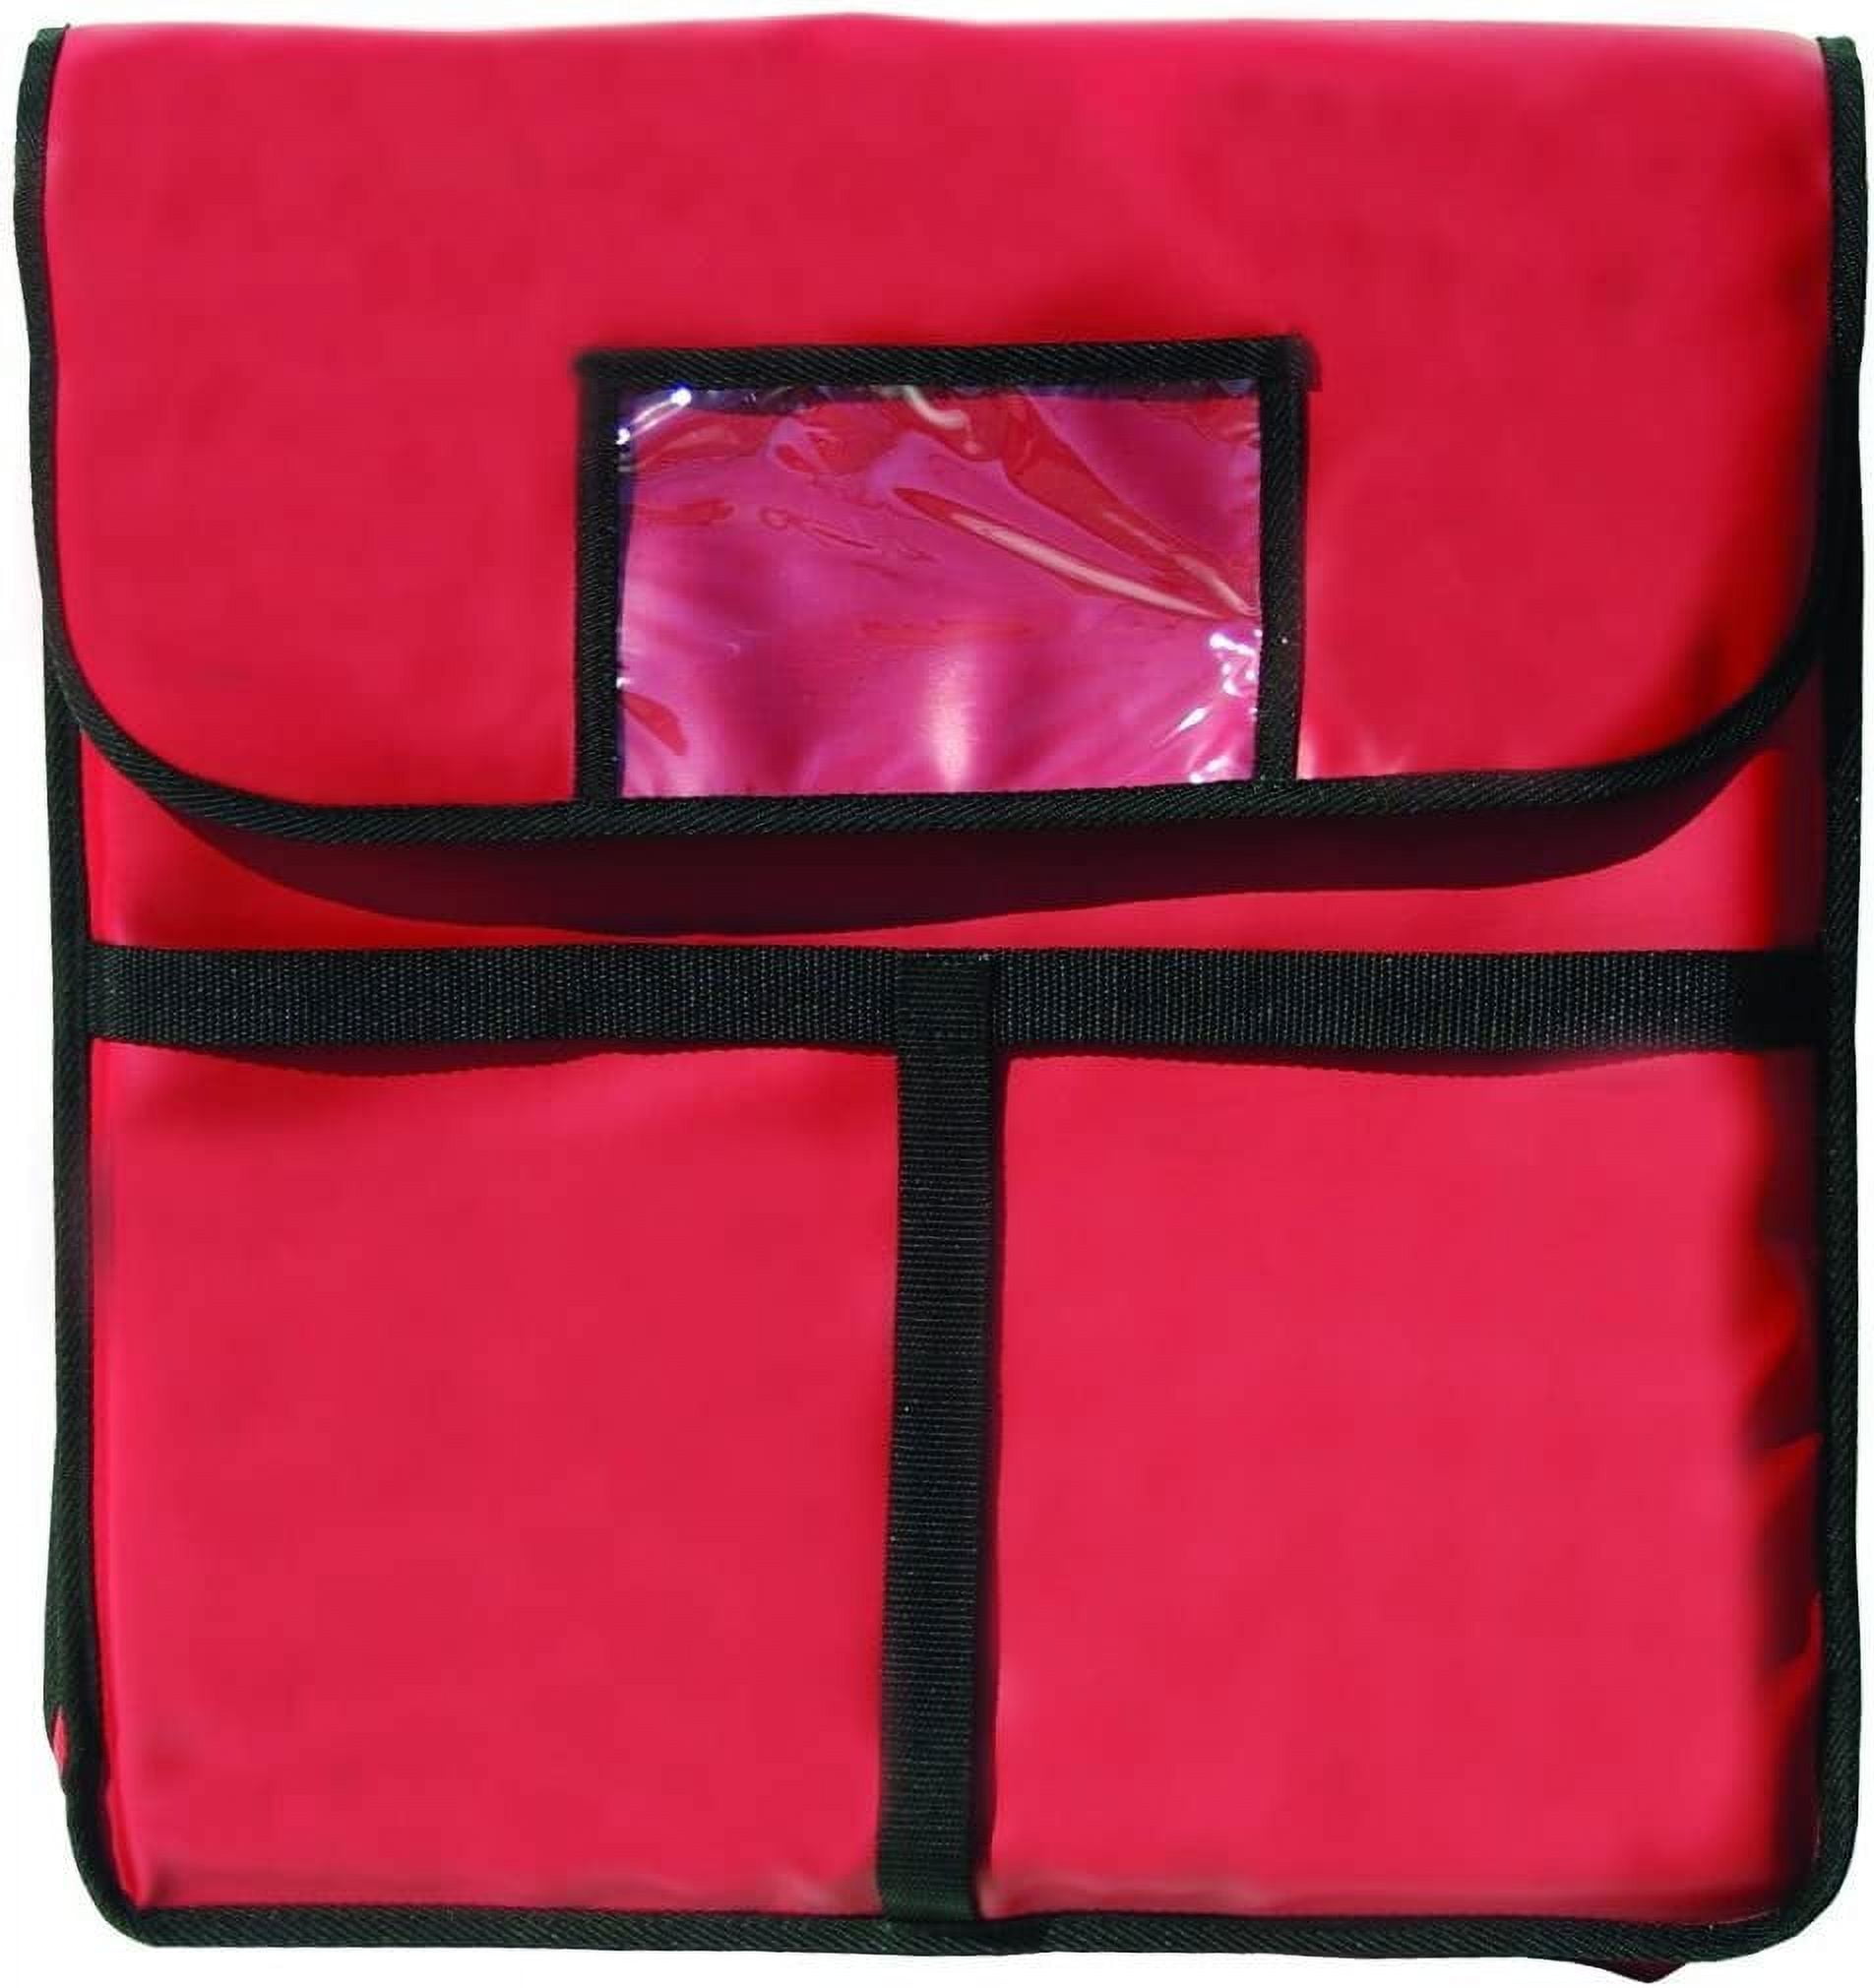 Pizza-heated bag - heated catering bag